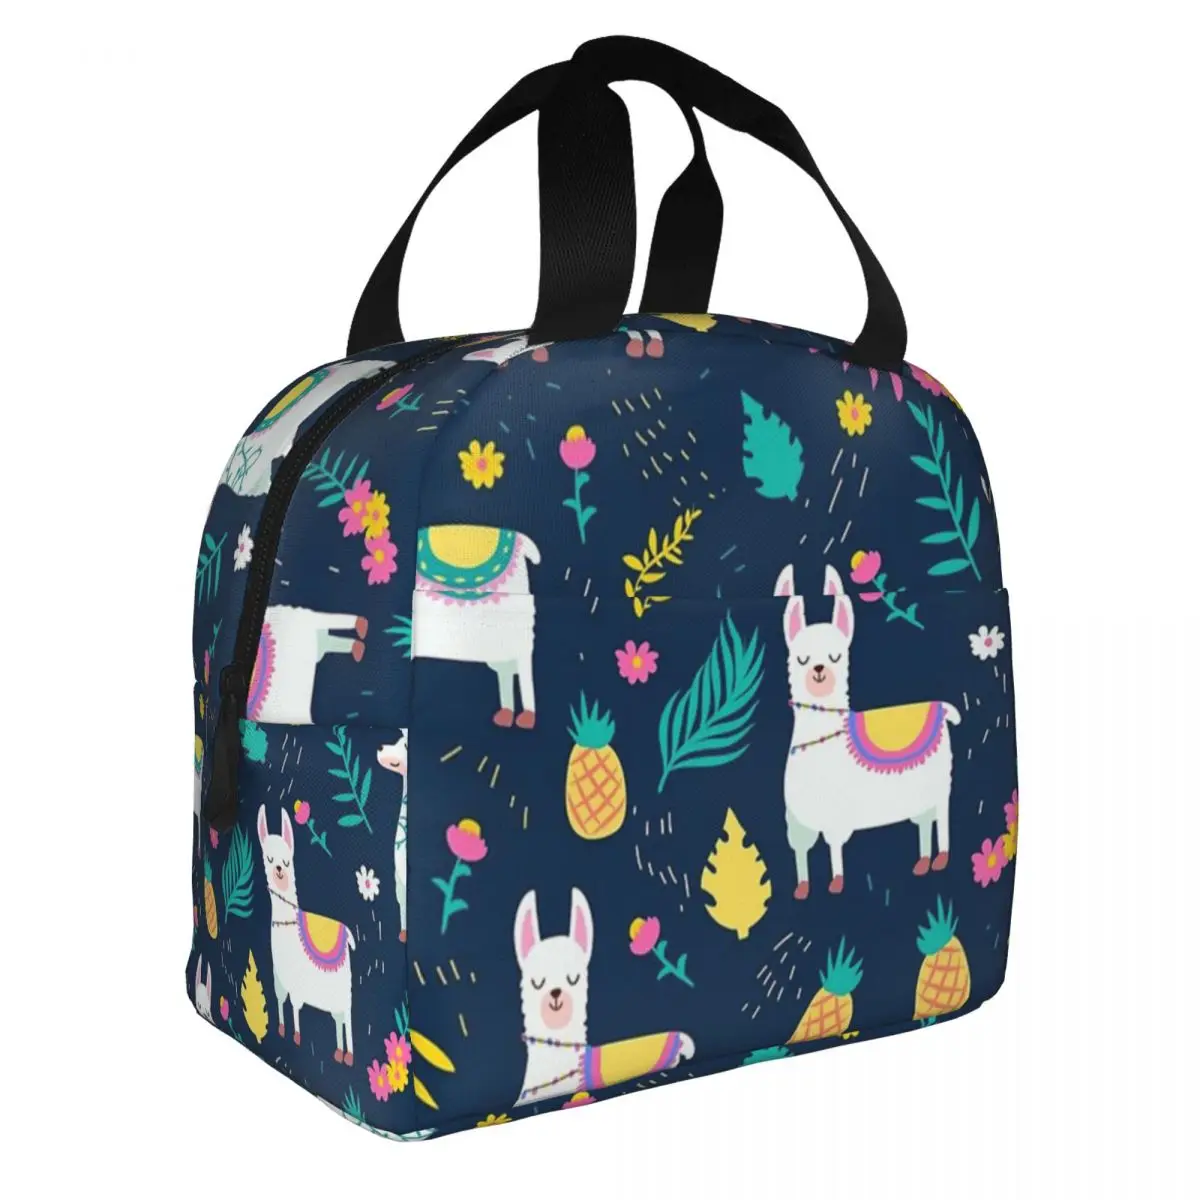 Cute Llama Pineapple Lunch Bag Portable Insulated Oxford Cooler Thermal Picnic Travel Lunch Box for Women Girl